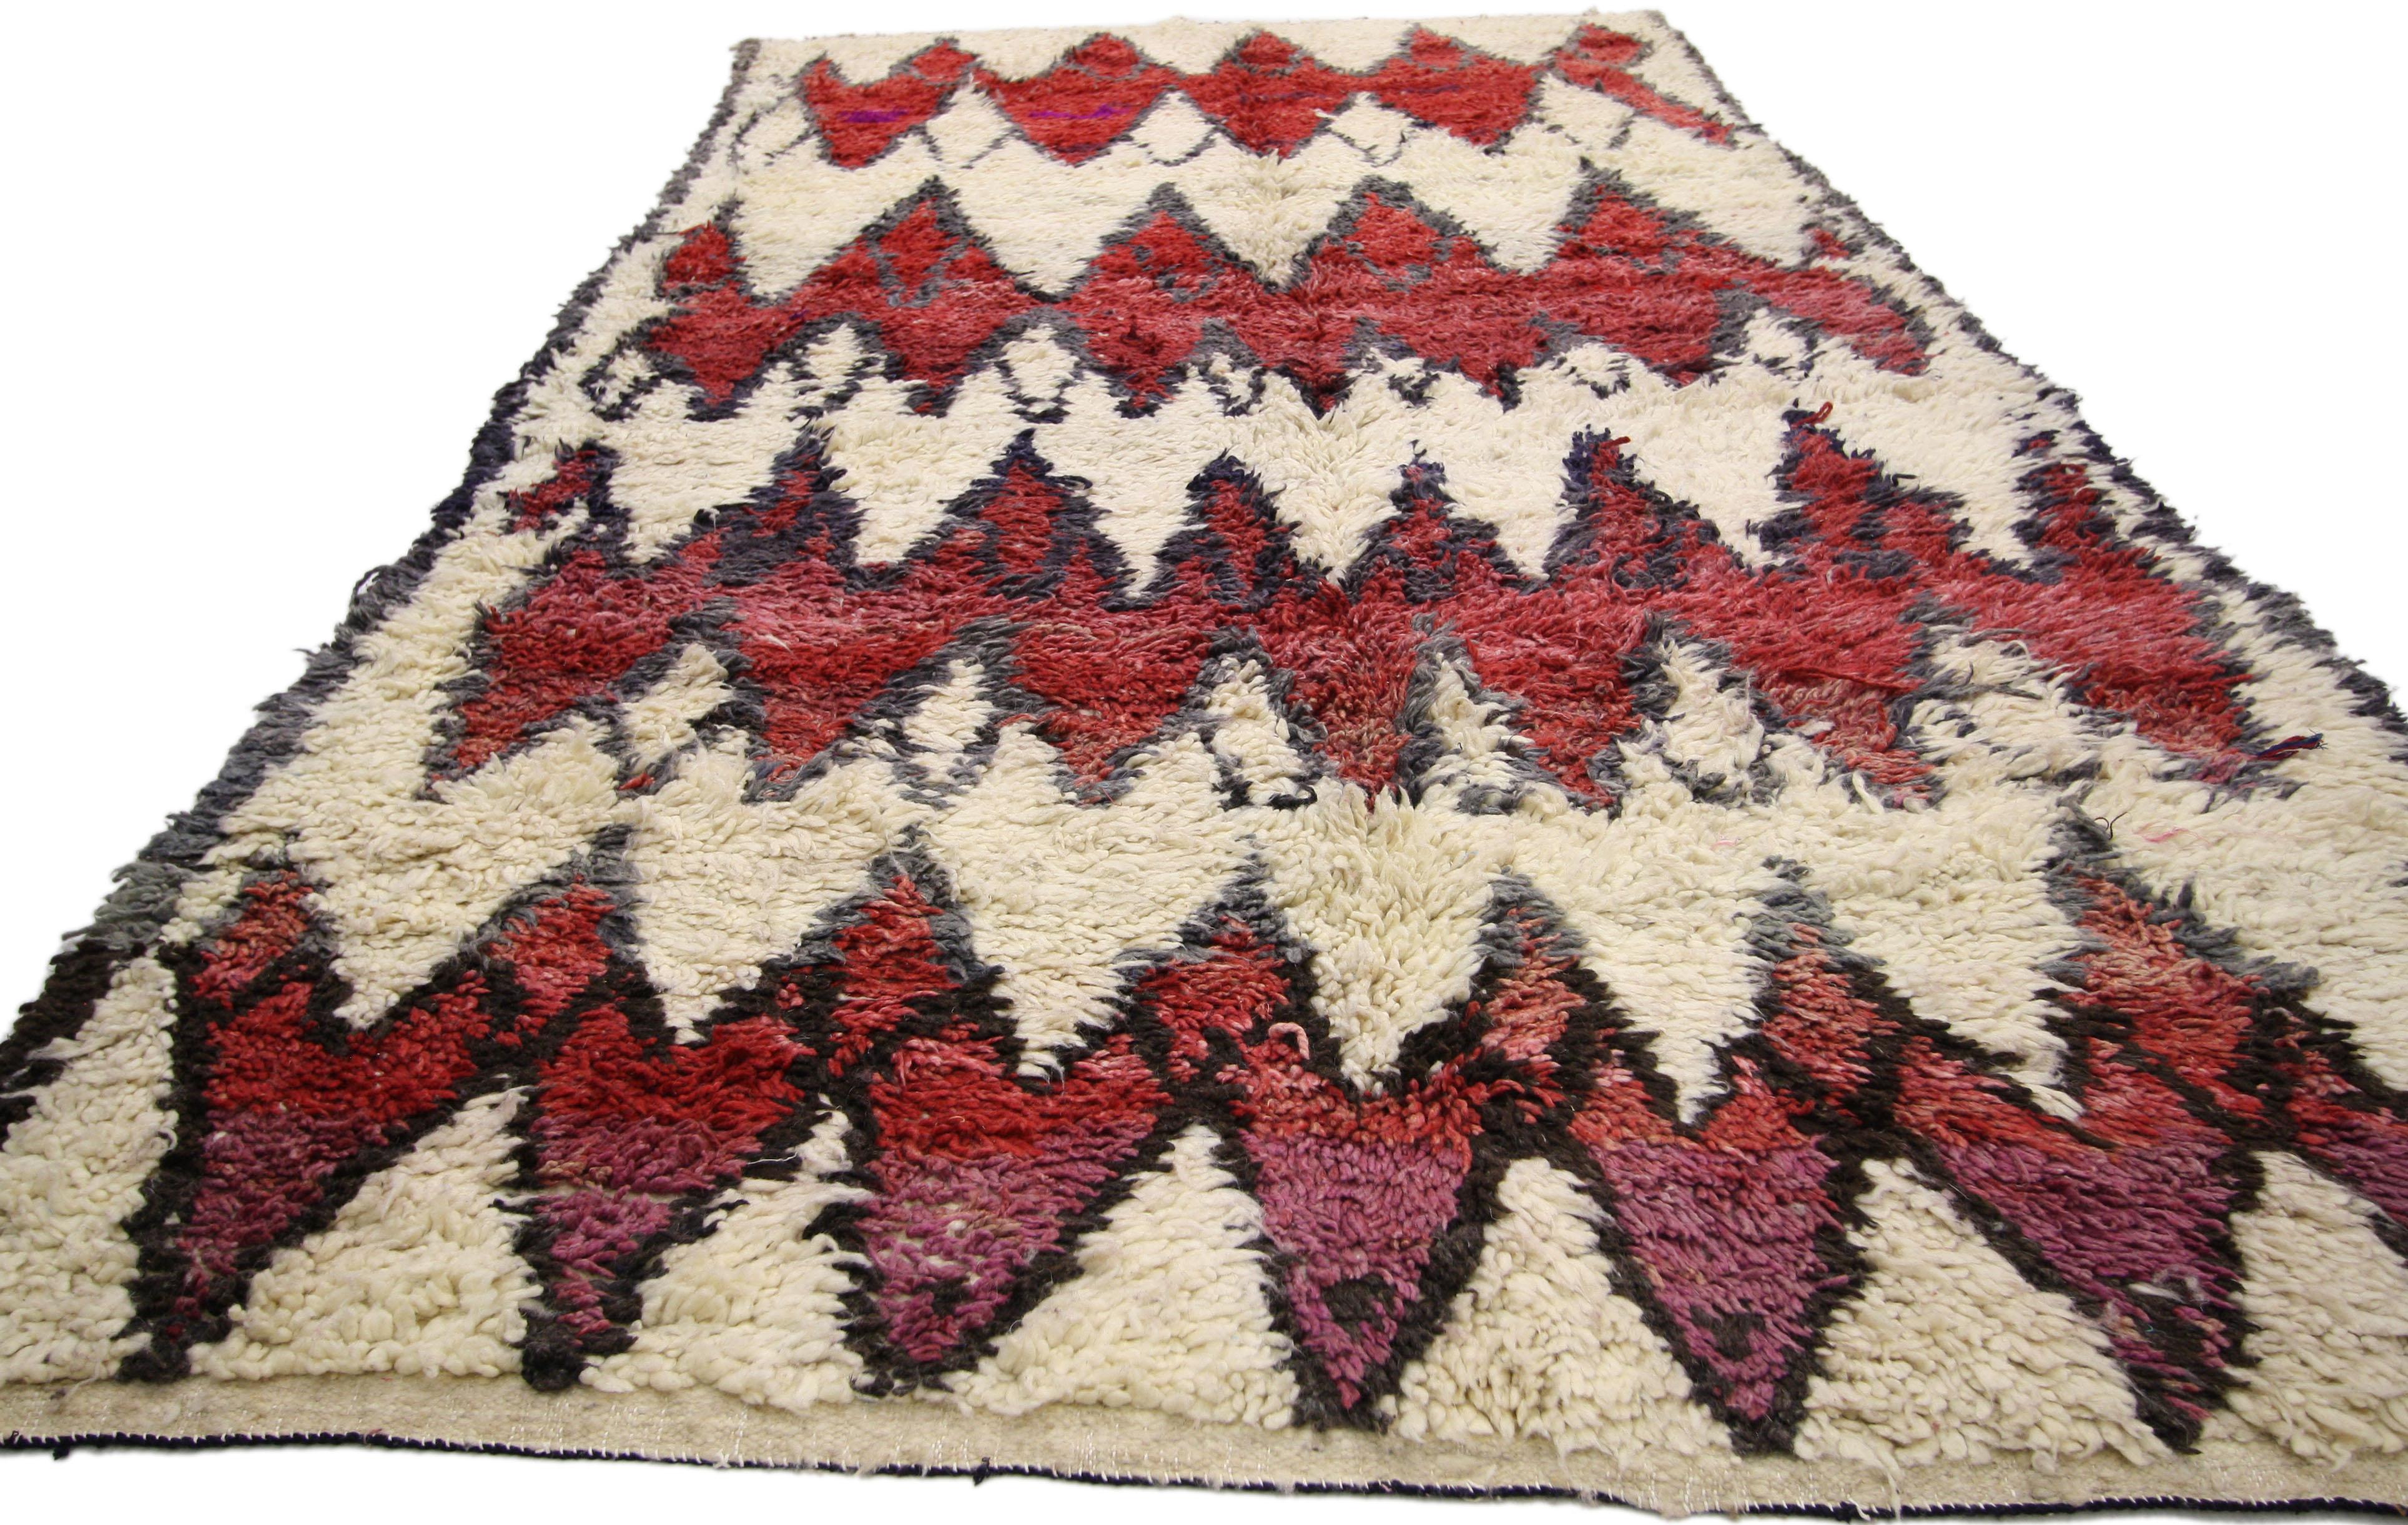 Hand-Knotted Vintage Berber Moroccan Rug with Tribal Style, Moroccan Berber Carpet